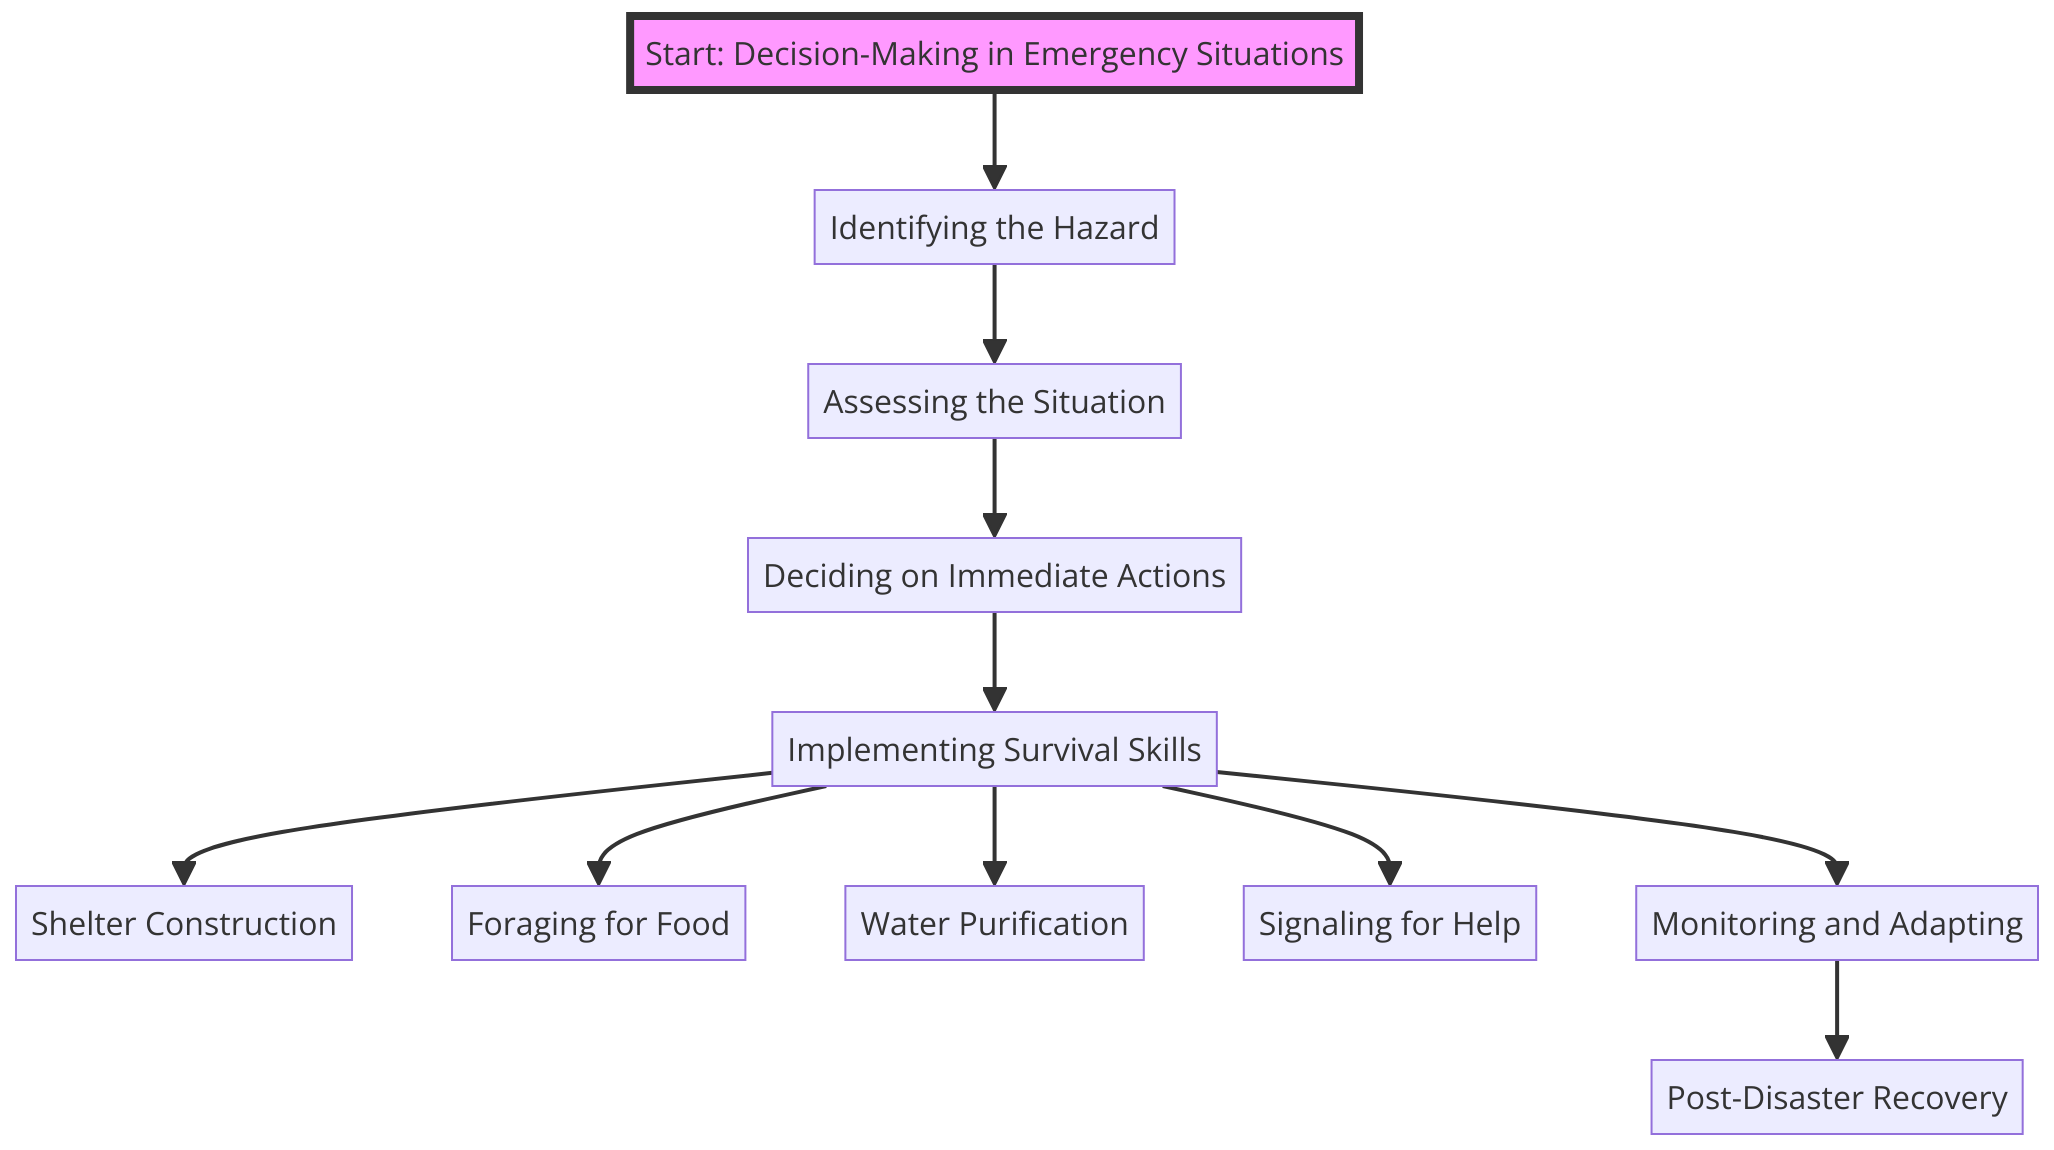 the decision-making process in emergency situations